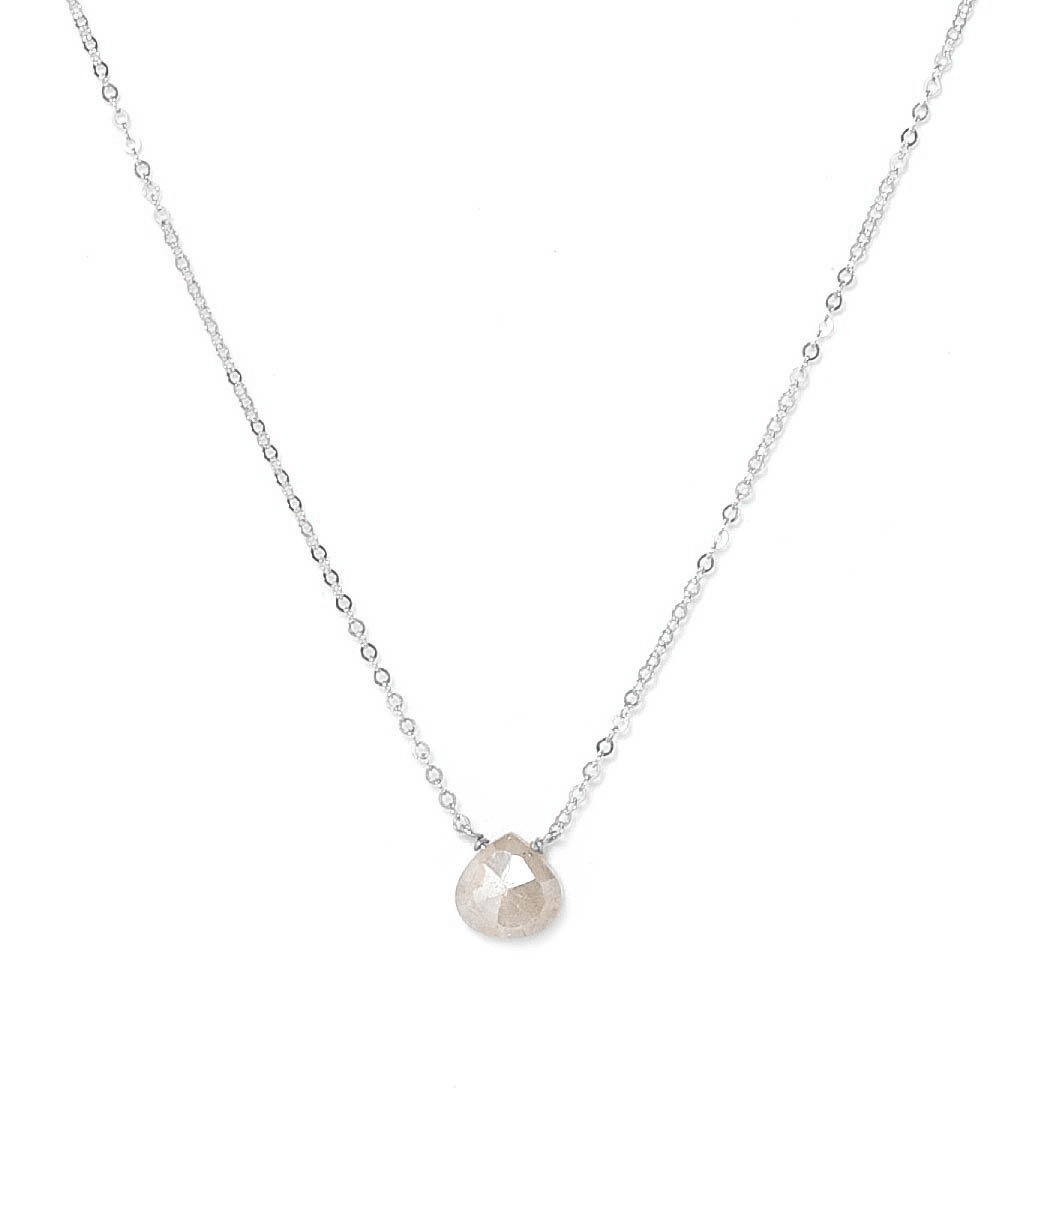 Dia Necklace by KOZAKH. A 16 to 18 inch adjustable length necklace in Sterling Silver, featuring a faceted White Sapphire.